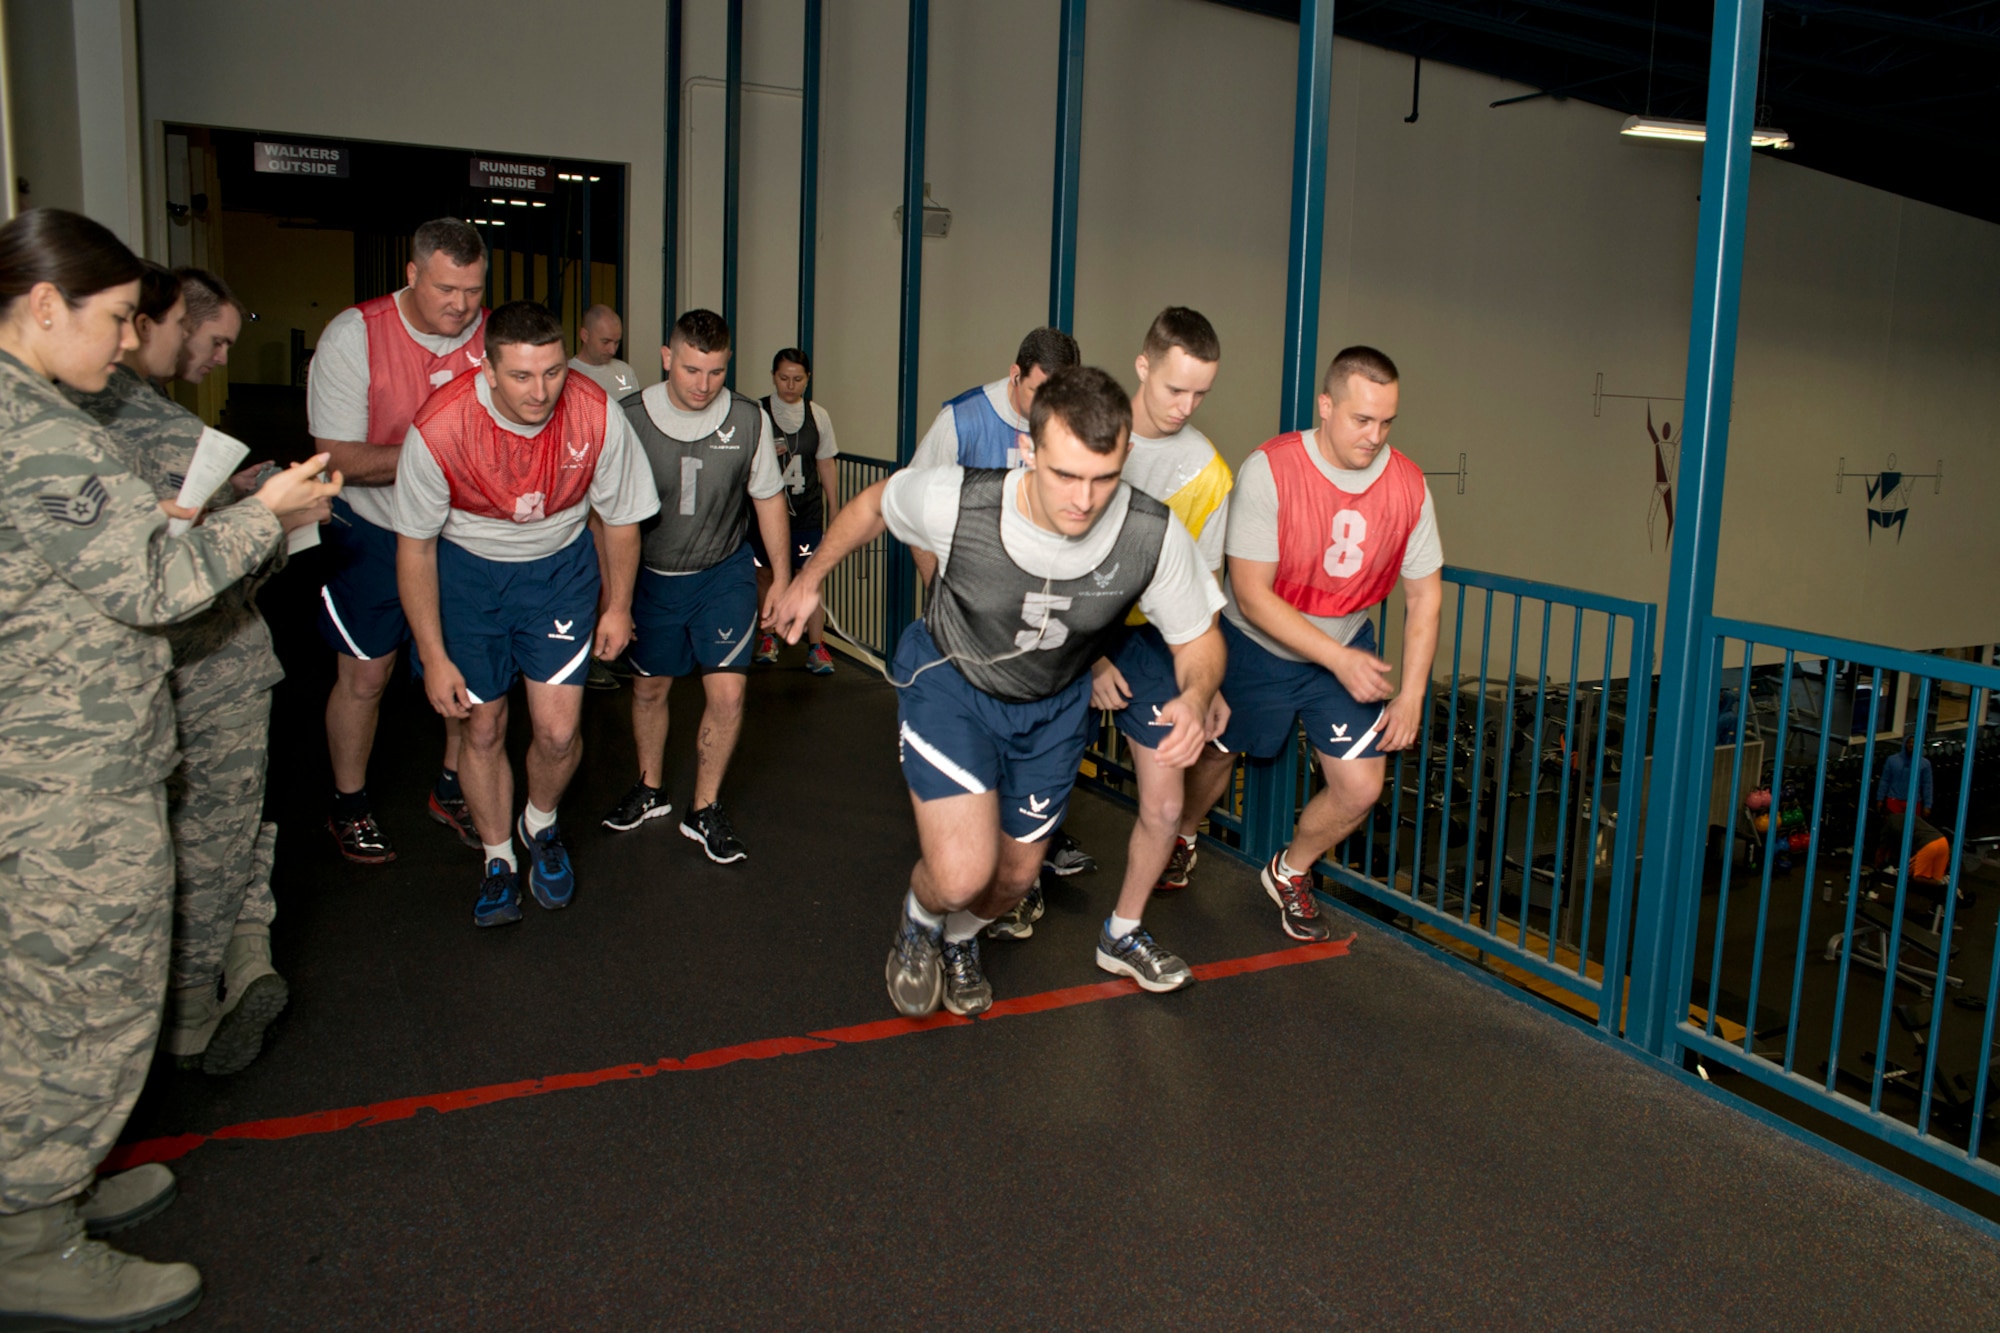 U.S. Air Force Reservists assigned to the 913th Airlift Group begin the run portion of their physical fitness assessment test at Little Rock Air Force Base, Ark., Mar. 12, 2016. The Air Force uses and overall composite fitness score and minimum scores per component based on aerobic fitness (1.5-mile timed run), body composition (abdominal circumference measurements) and muscular fitness components (pushups and situps) to determine overall fitness. (U.S. Air Force photo by Master Sgt. Jeff Walston/Released)

